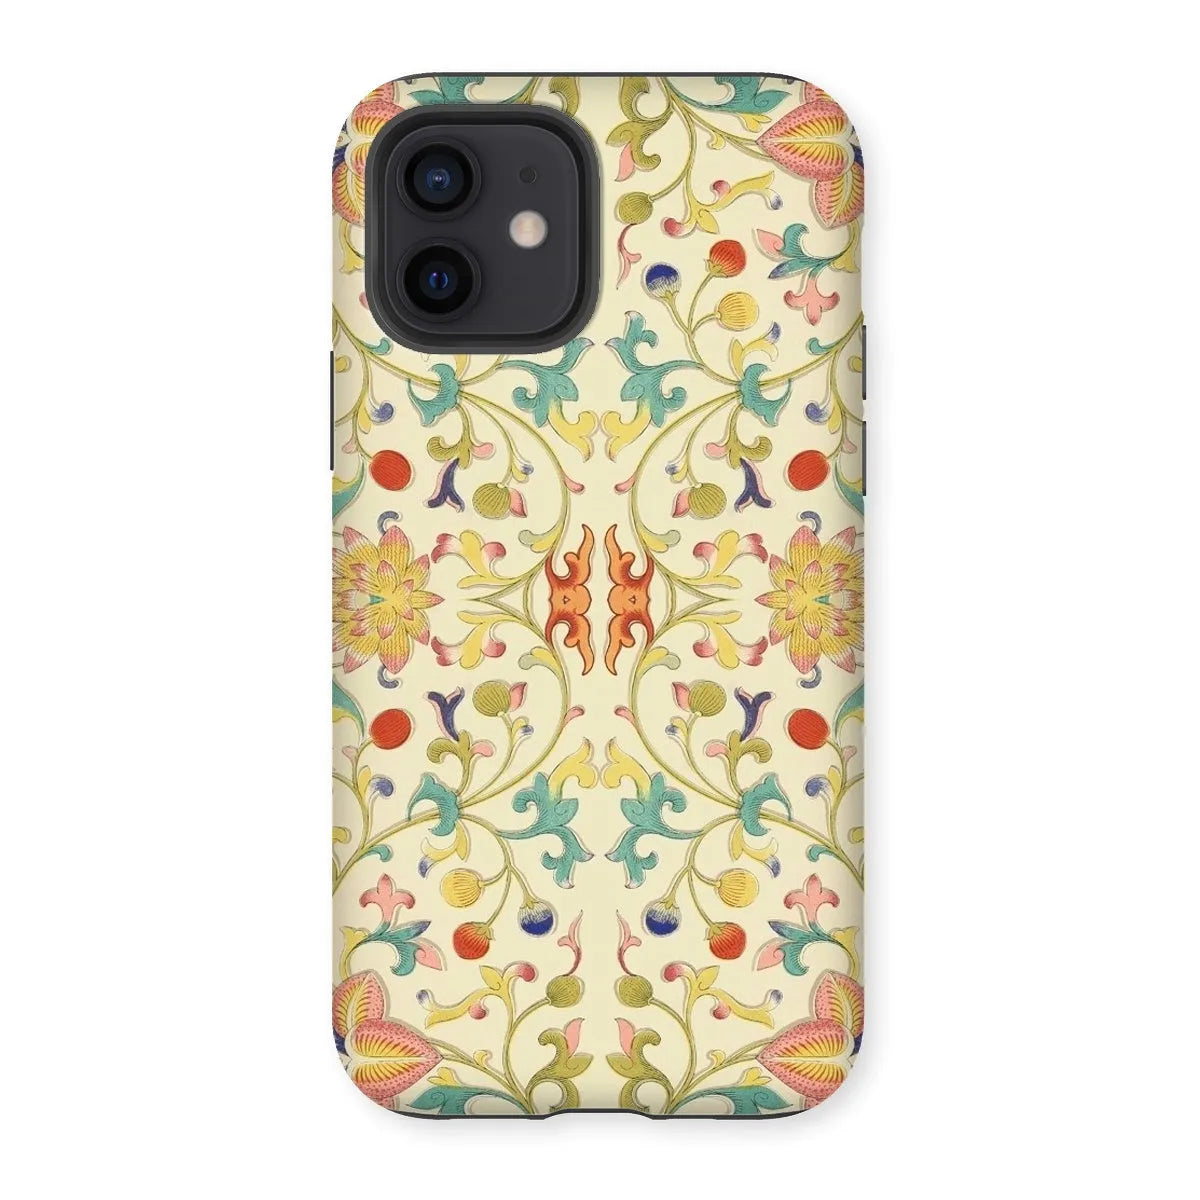 Over The Rainbow - Chinoiserie Pattern Art Phone Case - Iphone 12 / Matte - Mobile Phone Cases - Aesthetic Art